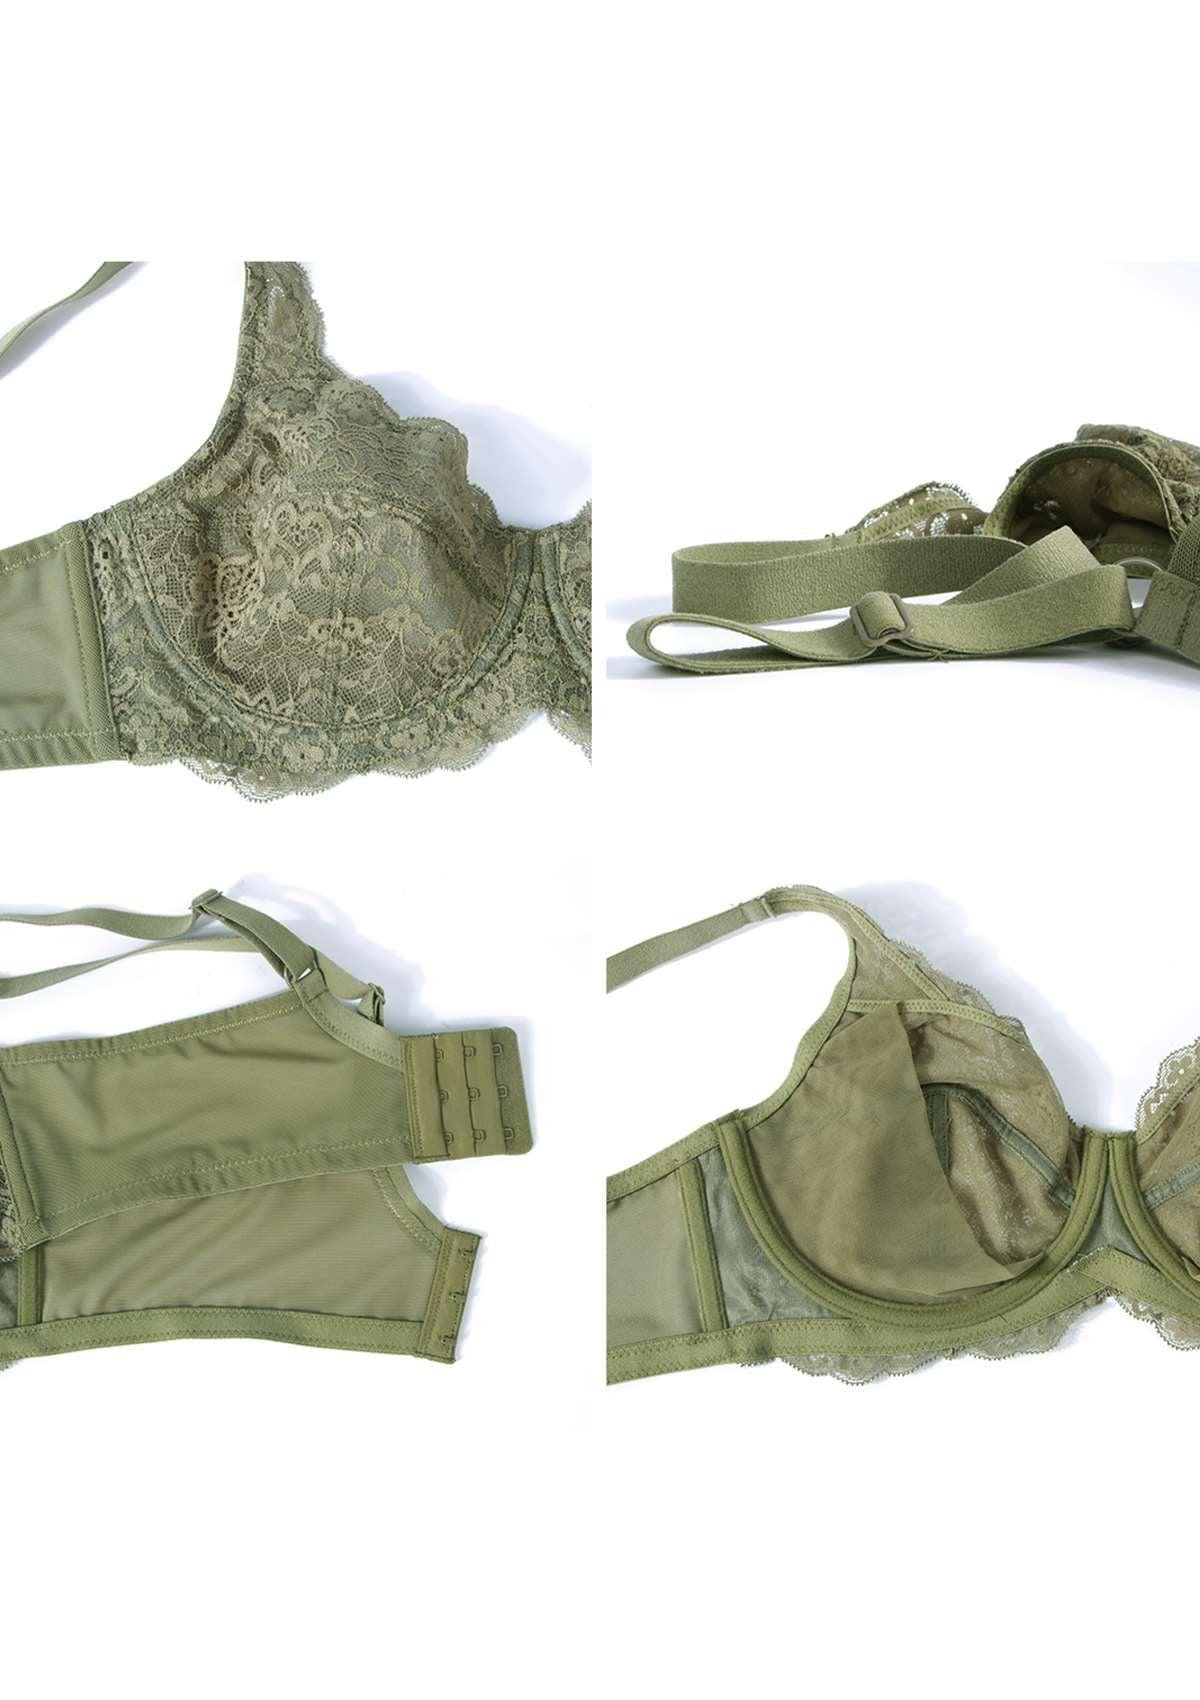 HSIA All-Over Floral Lace Unlined Bra: Minimizer Bra For Heavy Breasts - Dark Green / 36 / C